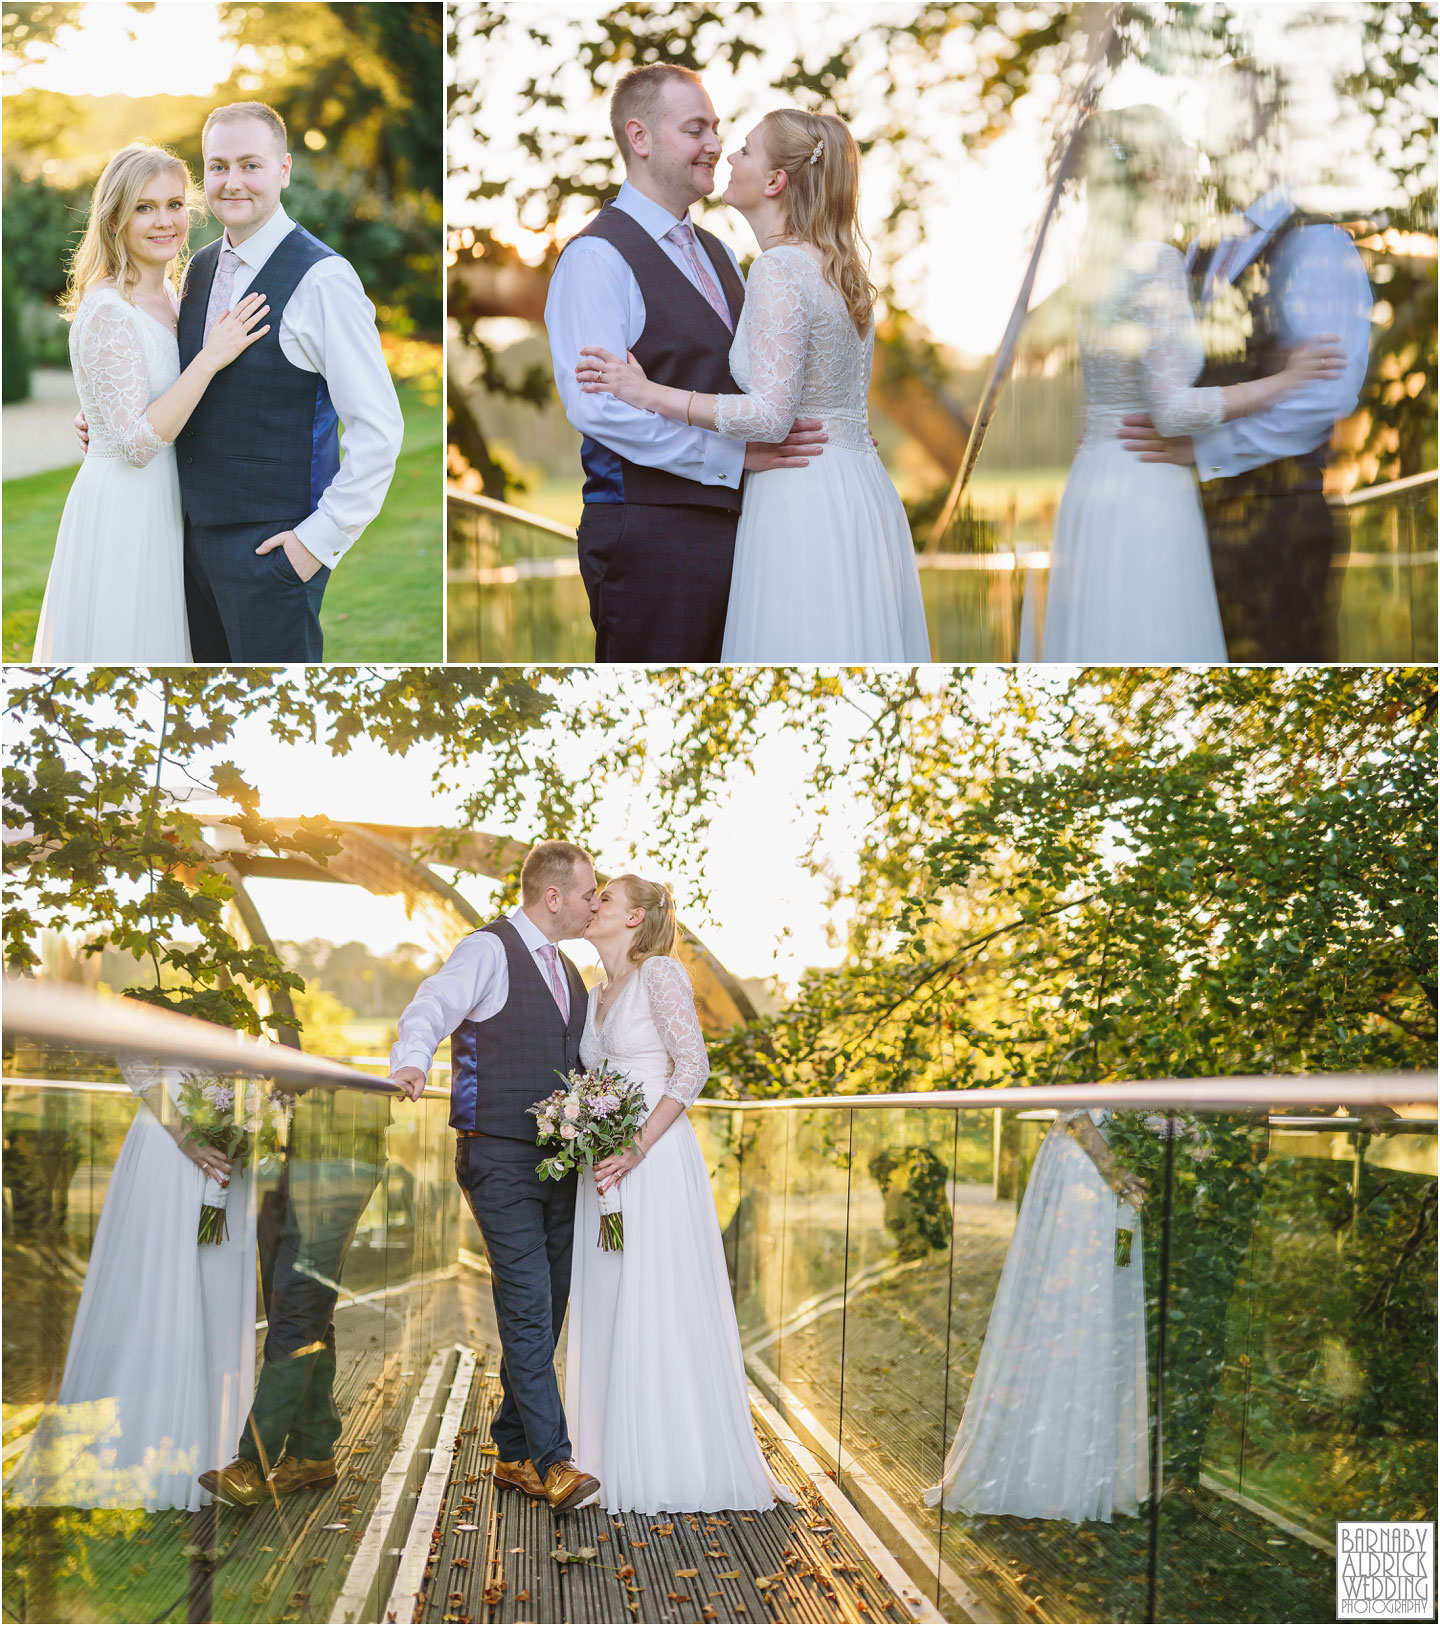 Golden hour wedding photos at Bowcliffe hall in Yorkshire